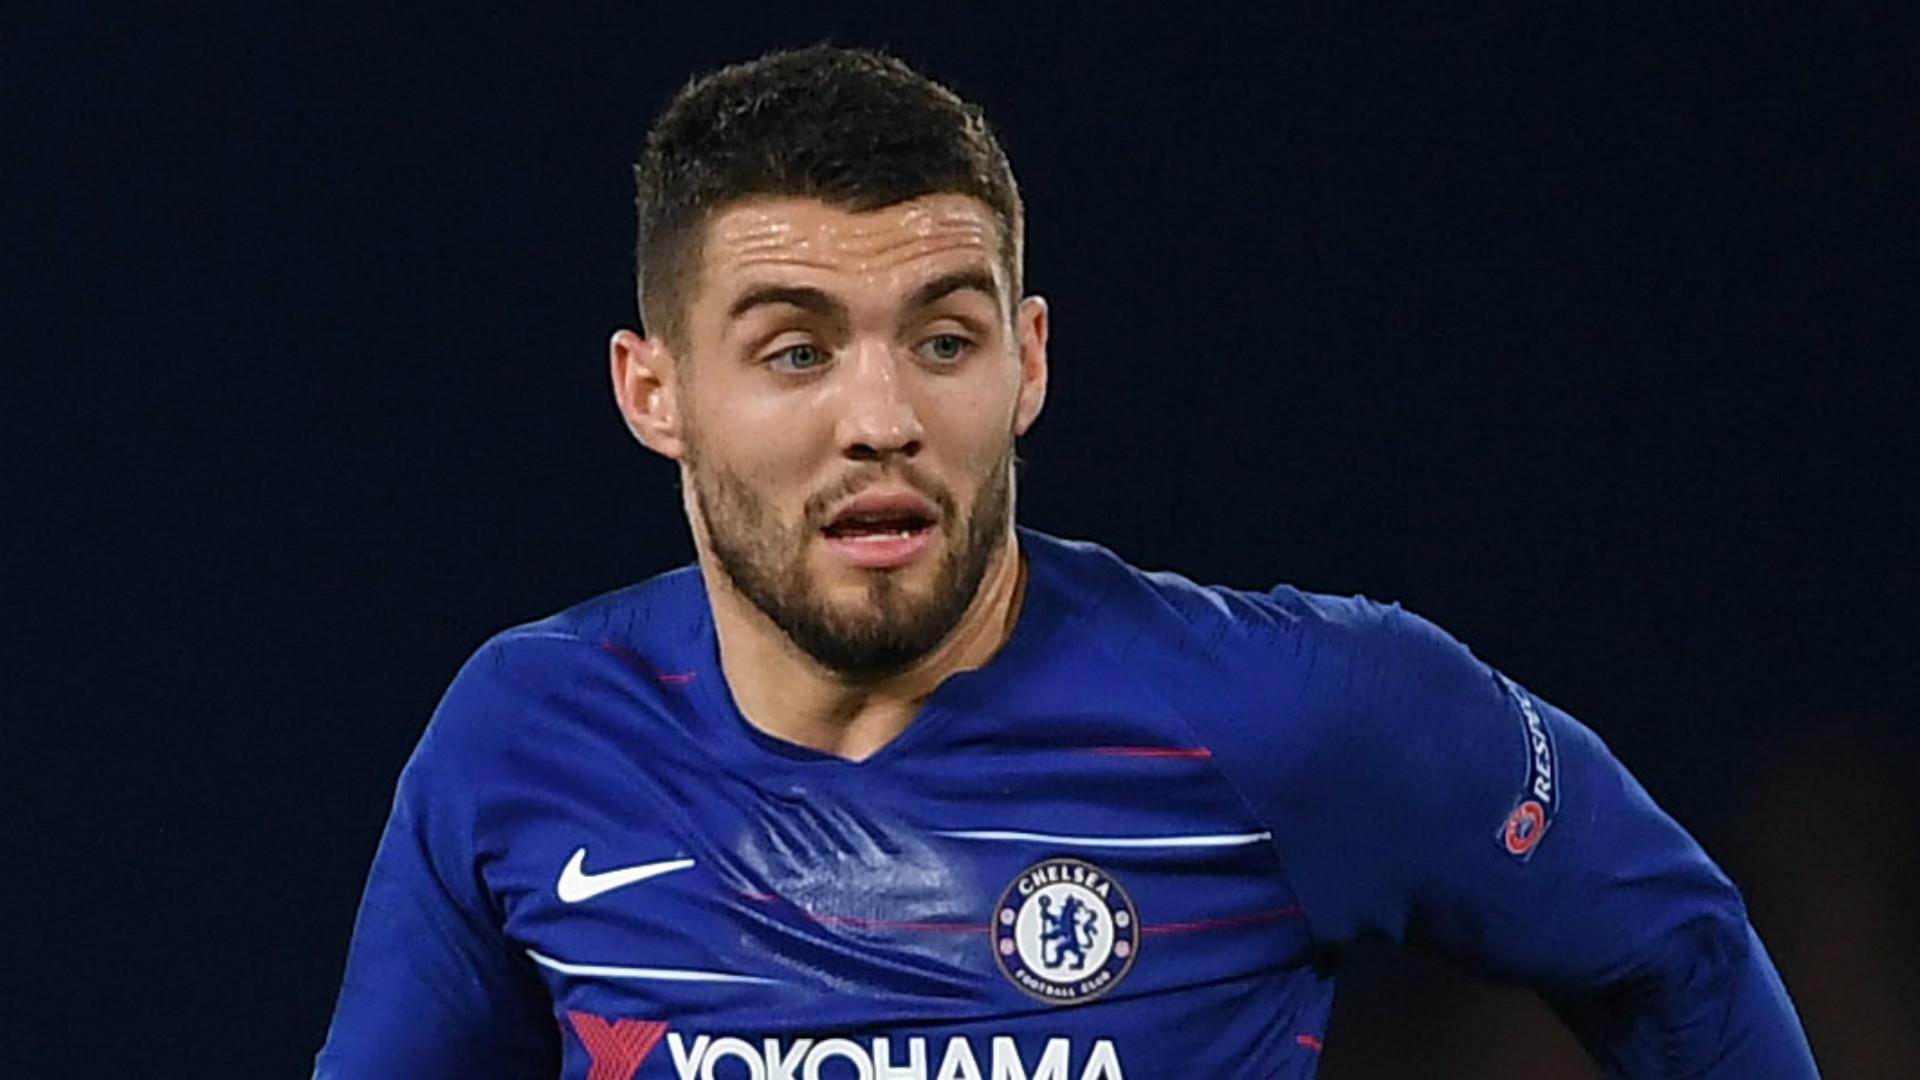 How did Chelsea sign Mateo Kovacic when they have a transfer ban from